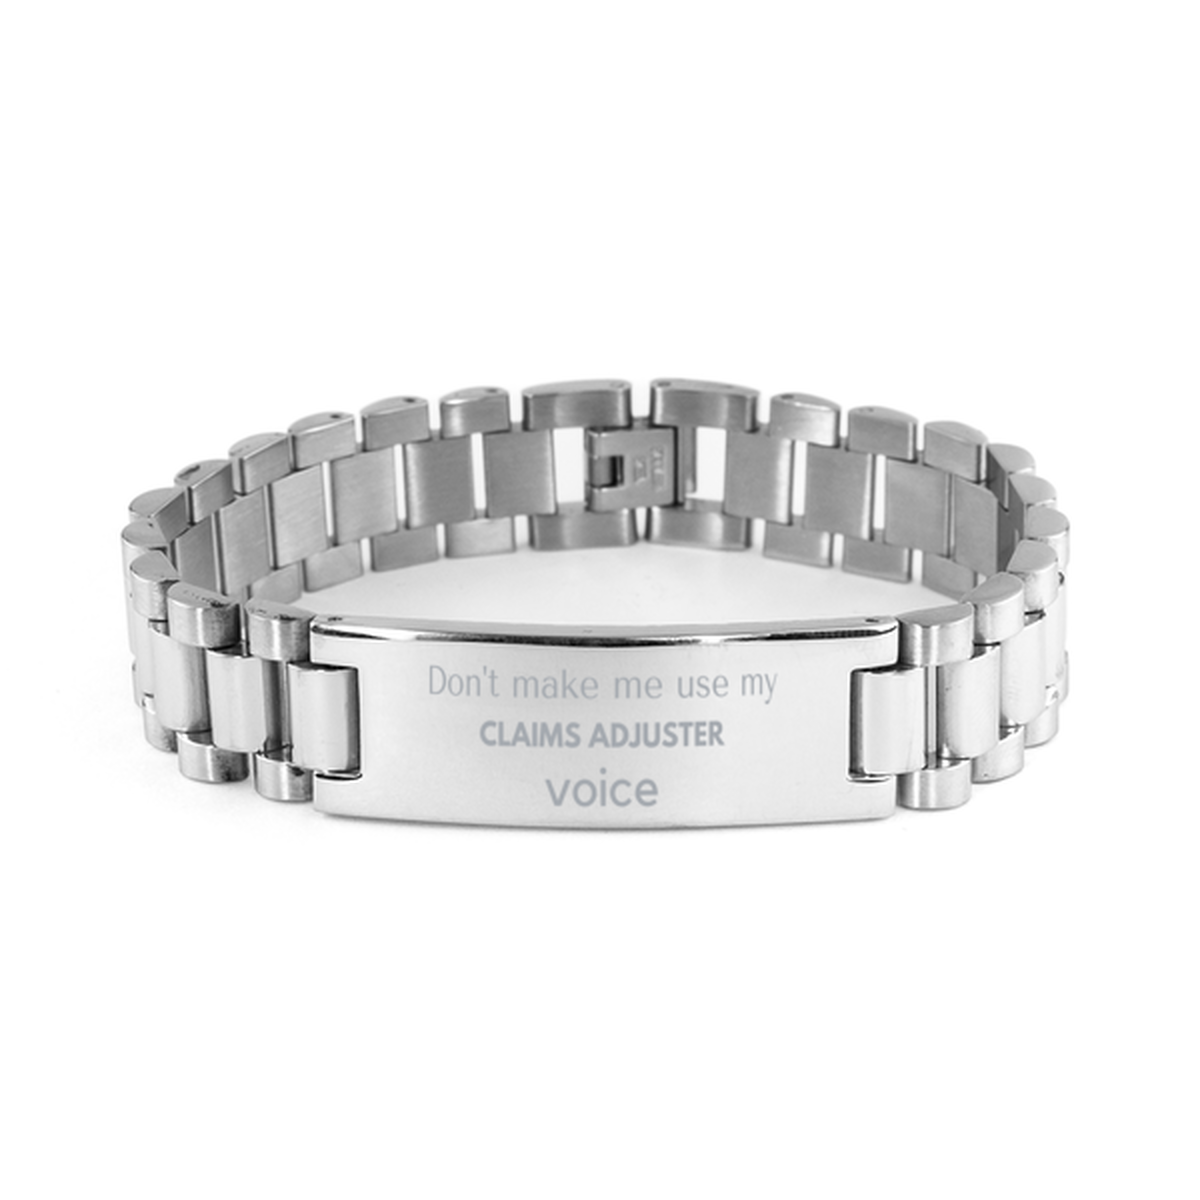 Don't make me use my Claims Adjuster voice, Sarcasm Claims Adjuster Gifts, Christmas Claims Adjuster Ladder Stainless Steel Bracelet Birthday Unique Gifts For Claims Adjuster Coworkers, Men, Women, Colleague, Friends